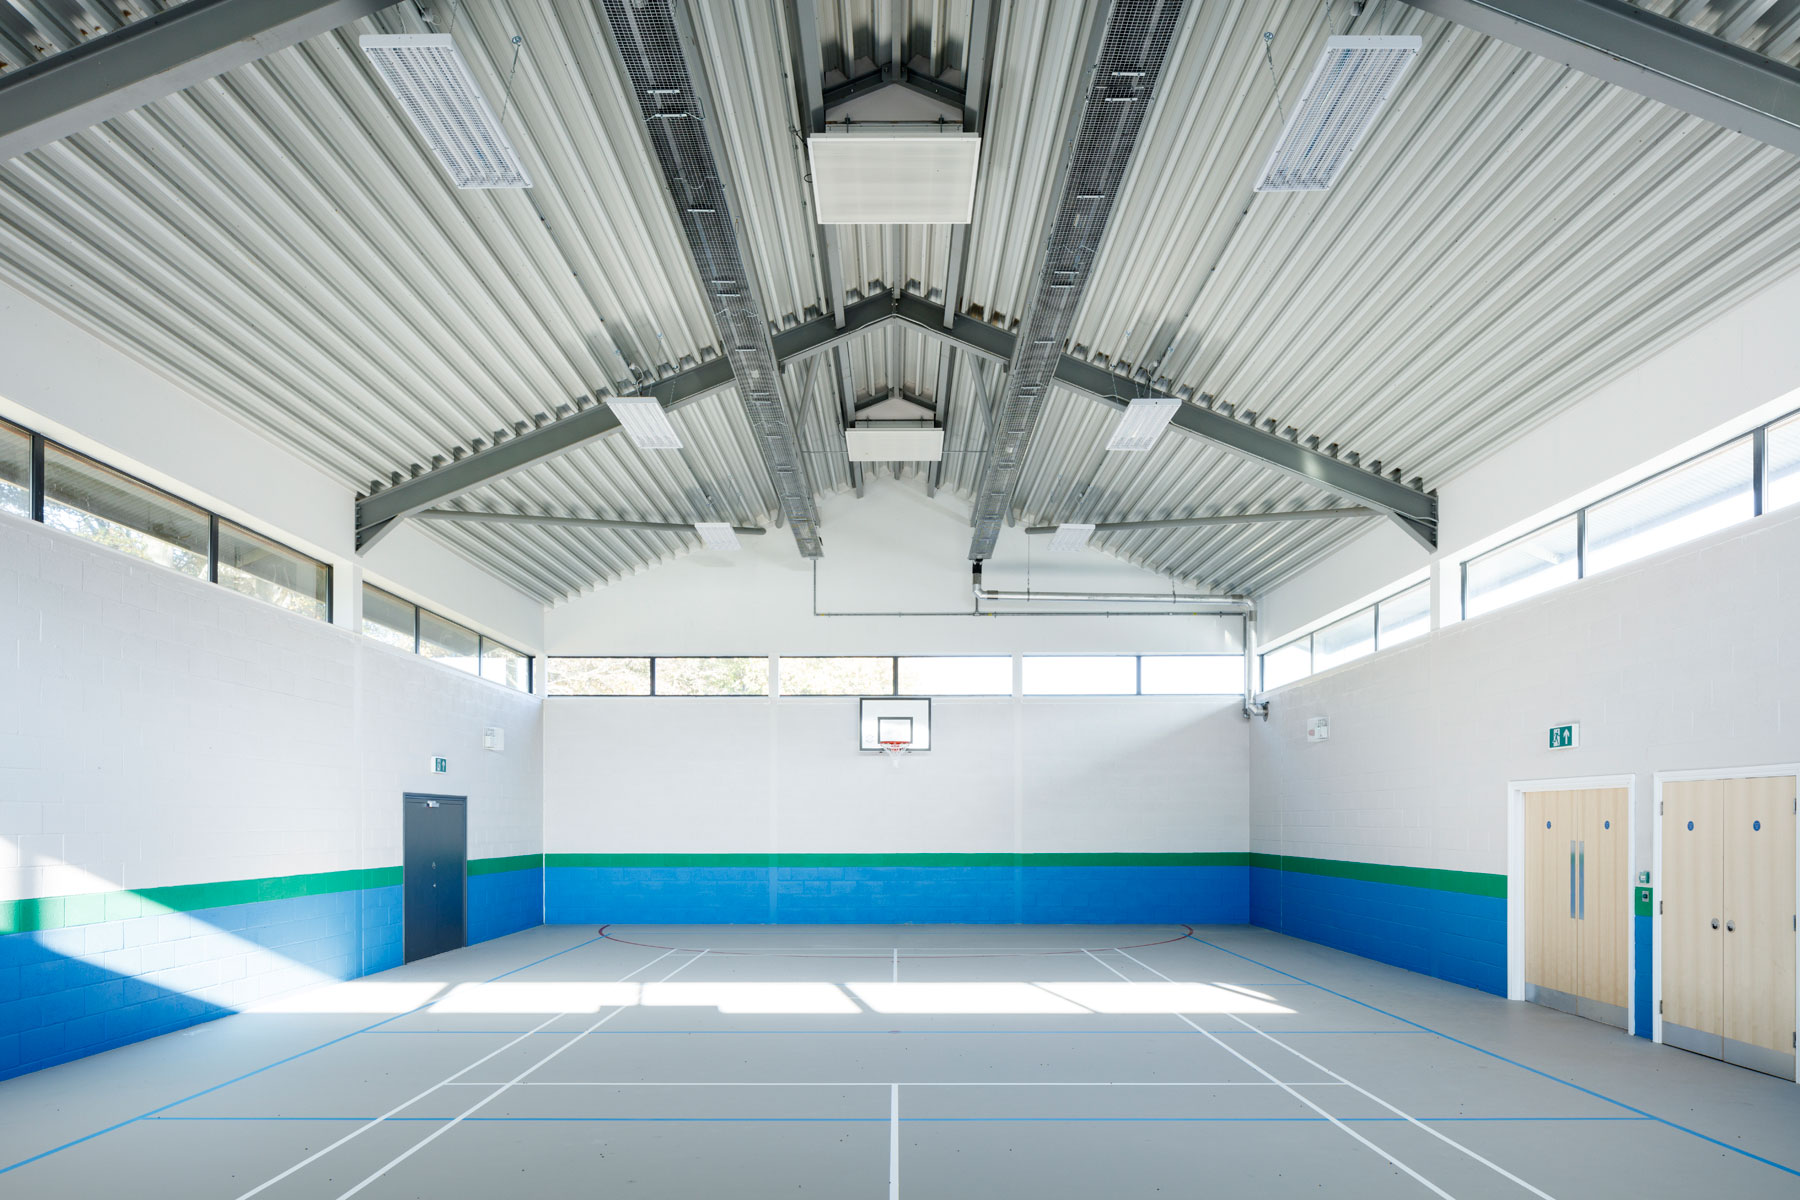 New Barn Specialist School – New Purpose-built gymnasium and changing facilities